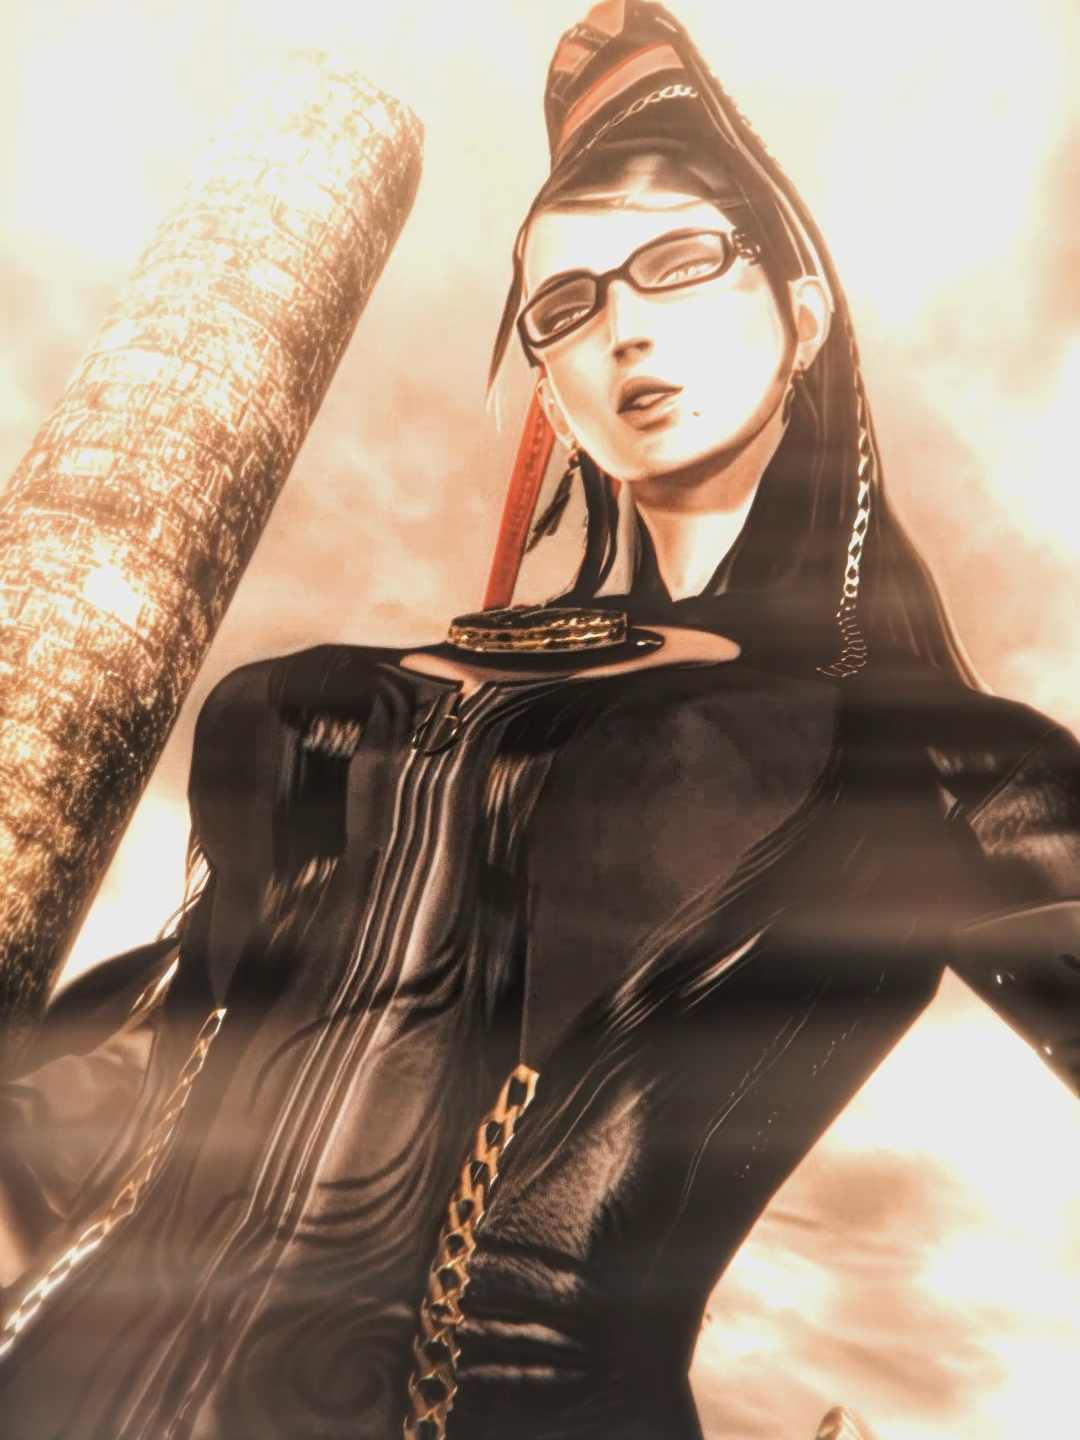 Bayo 1 version // maybe a little to bright // cc:me // #bayonetta #bayonetta2 #bayonetta3 #bayonettatt #bayonettaiconic #bayonettaedit #edit #tt #iconic #quality #velocity #velocityedit #fyp #foryou #foryoupage #fypシ゚viral #viral #goviral #blowthisup #dontflop #aftereffects #blurrr #topaz #viraledit #xyzbca #xybca